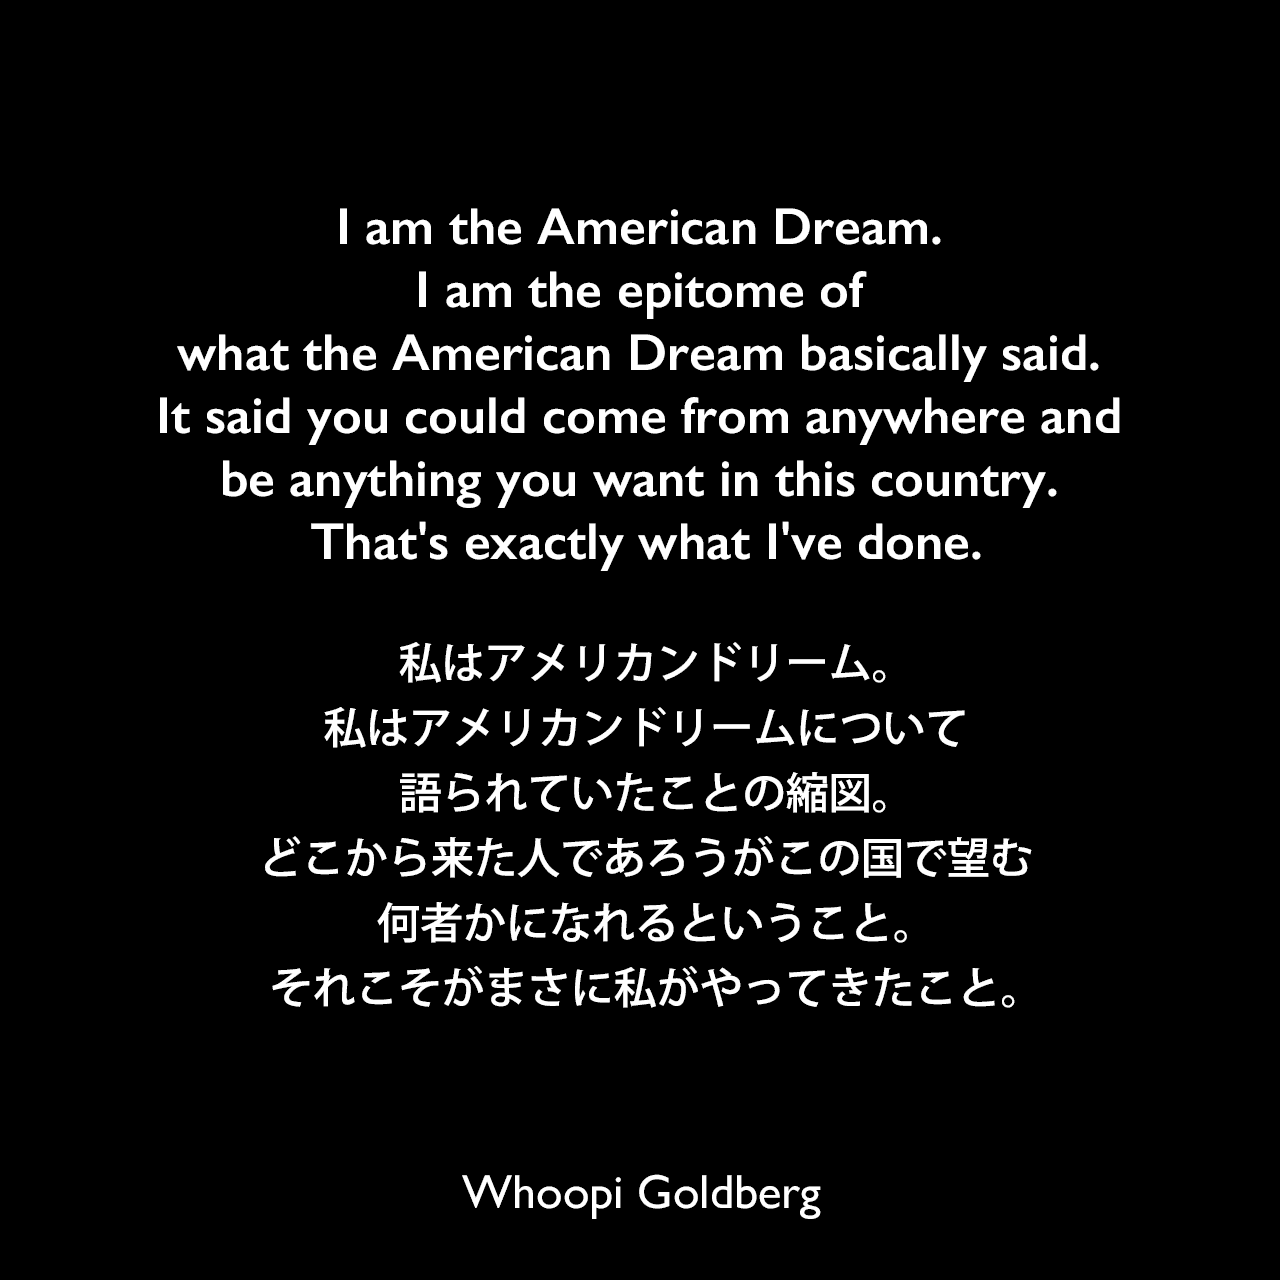 I am the American Dream. I am the epitome of what the American Dream basically said. It said you could come from anywhere and be anything you want in this country. That's exactly what I've done.私はアメリカンドリーム。私はアメリカンドリームについて語られていたことの縮図。どこから来た人であろうがこの国で望む何者かになれるということ。それこそがまさに私がやってきたこと。Whoopi Goldberg